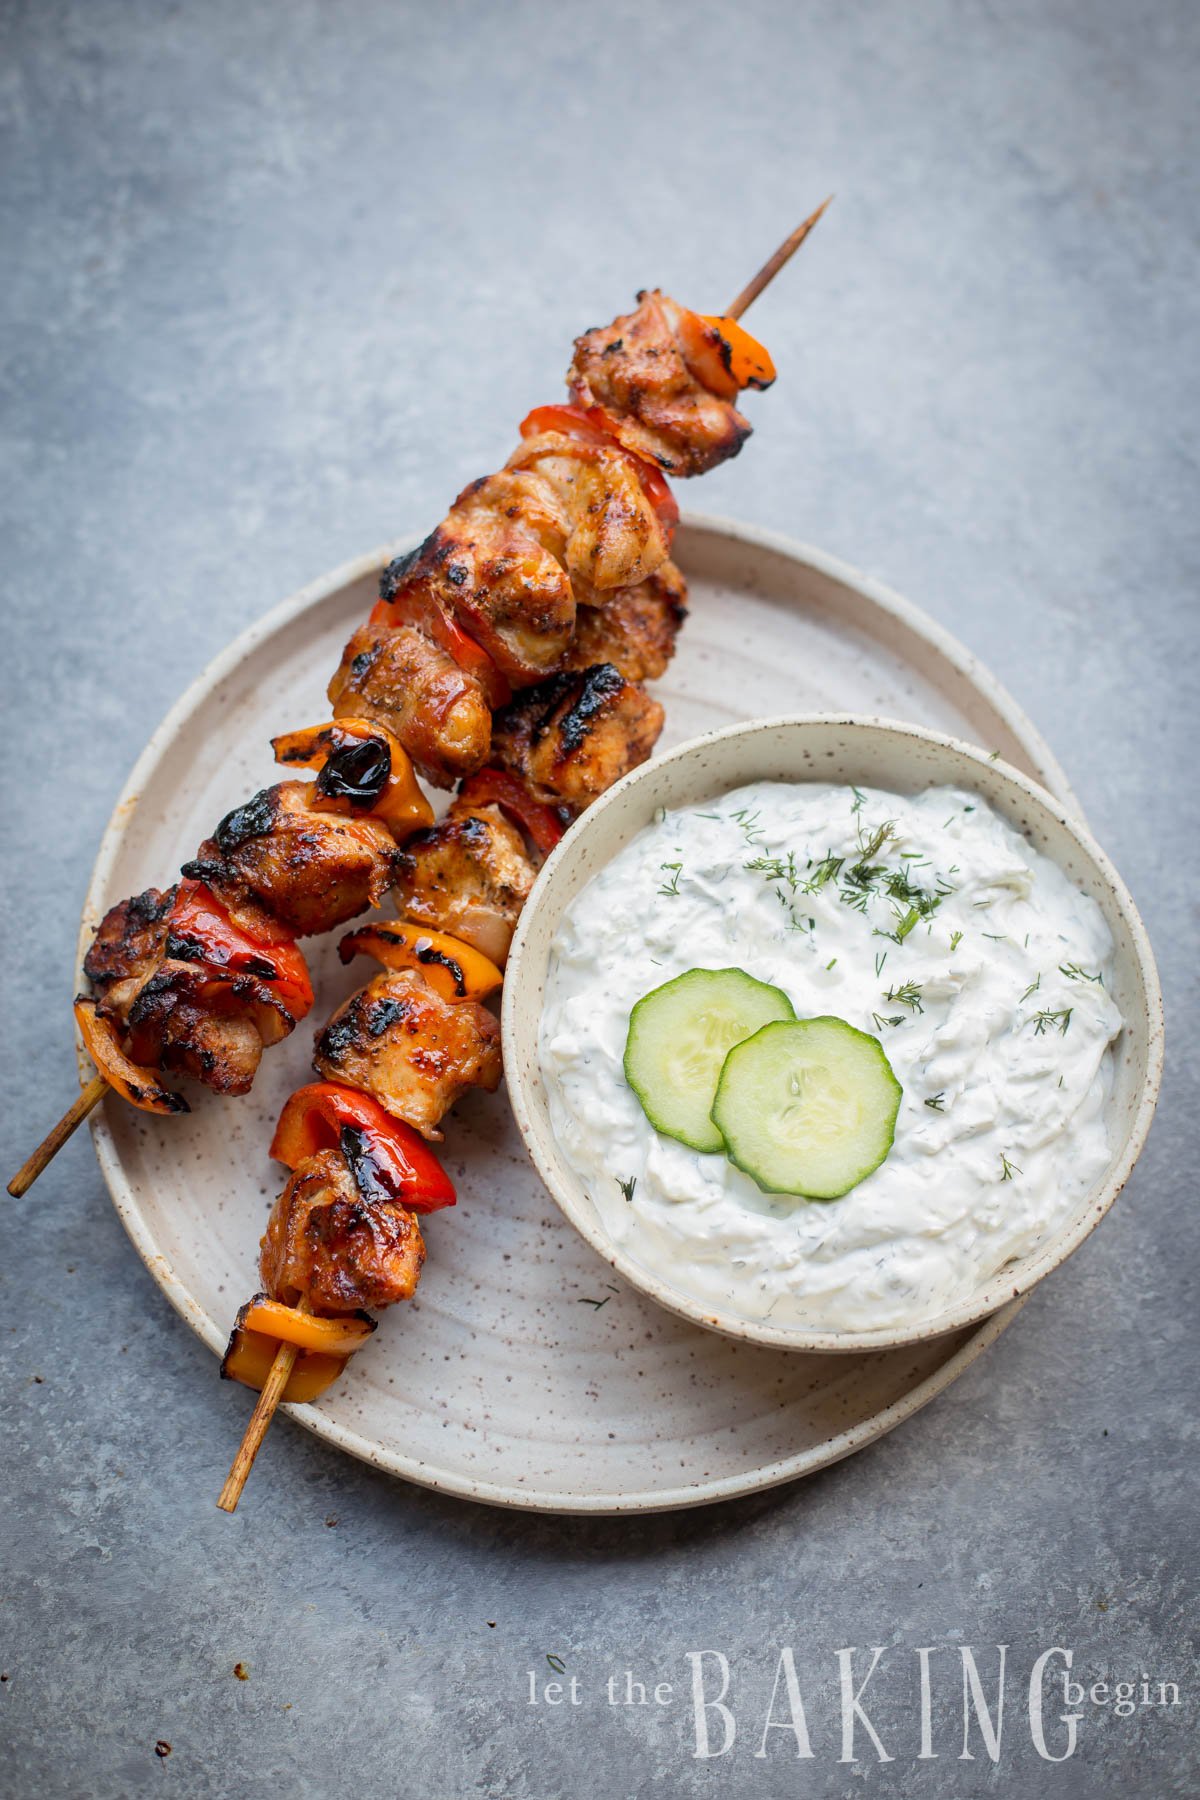 Homemade tzatziki sauce with fresh dill and cucumber with skewered chicken kabobs.